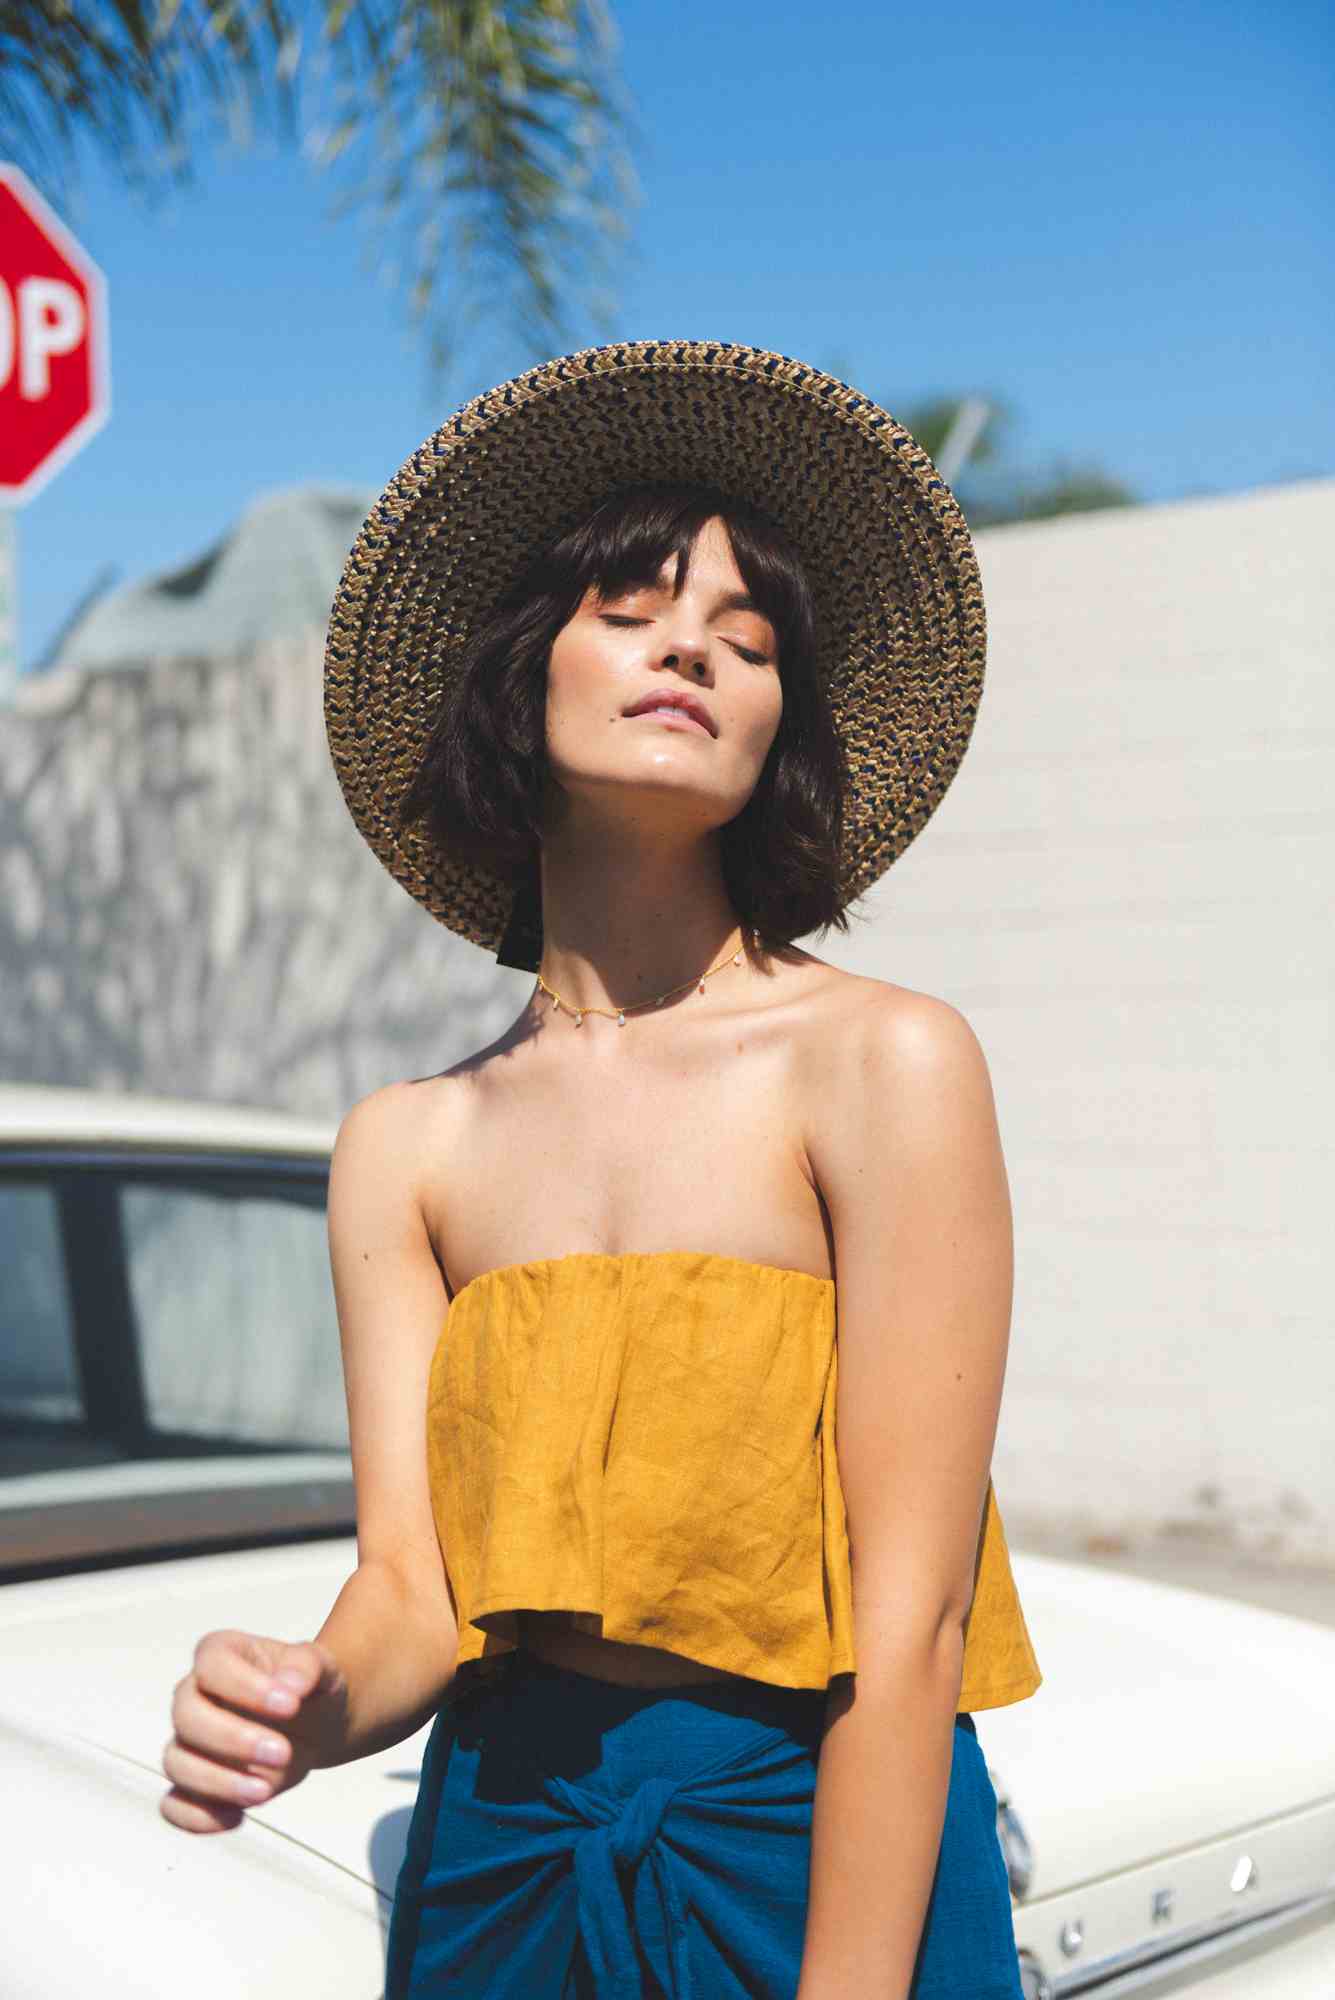 Straw hat for women Trend 2019 Top shoulder-free fashion trends Summer short hair styles